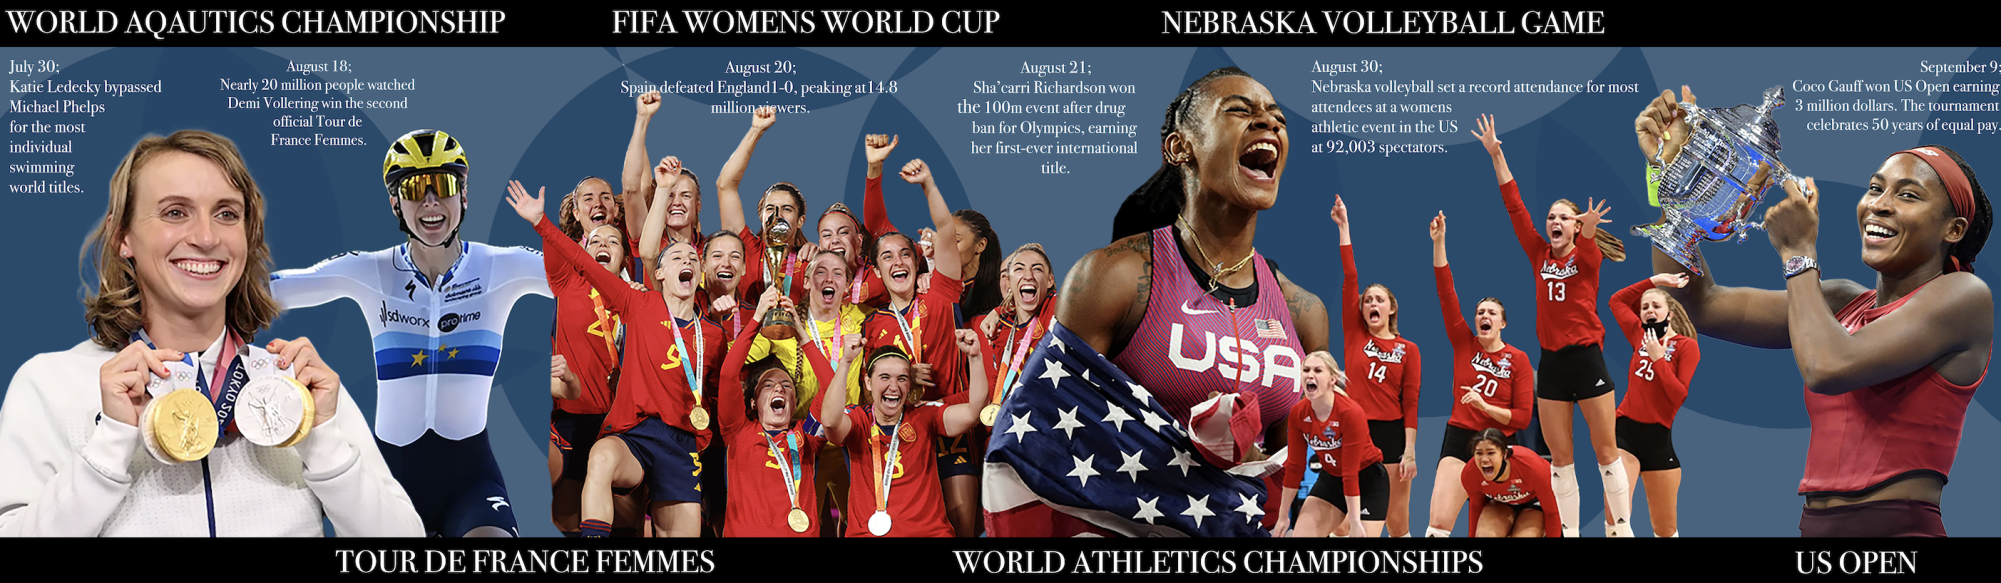 Gender Inequality in Sports: From Title IX to World Titles